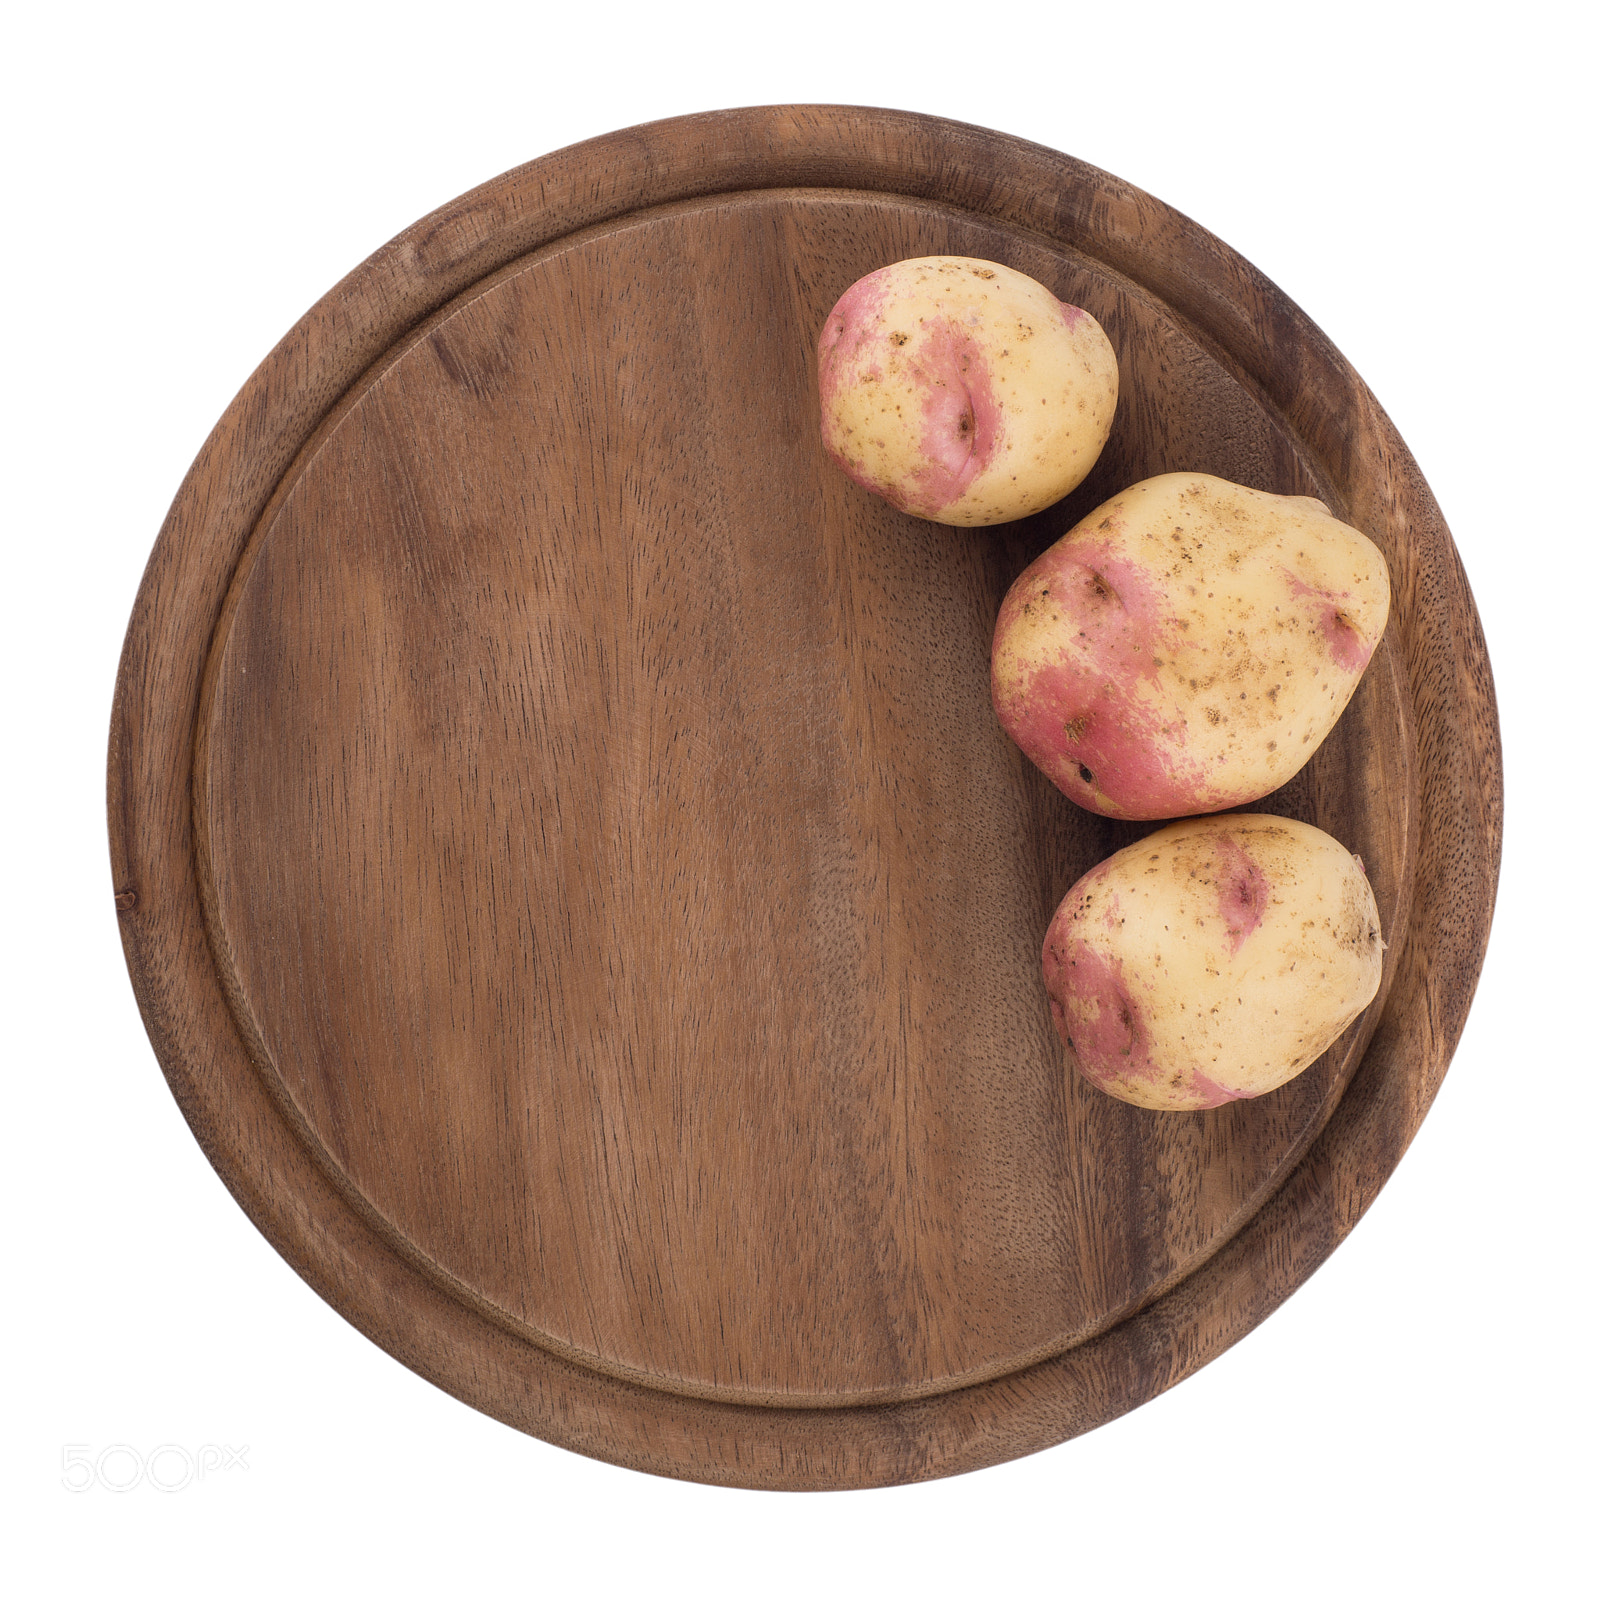 Sony a99 II sample photo. Young potatoes on a cutting board on white background close-up. photography